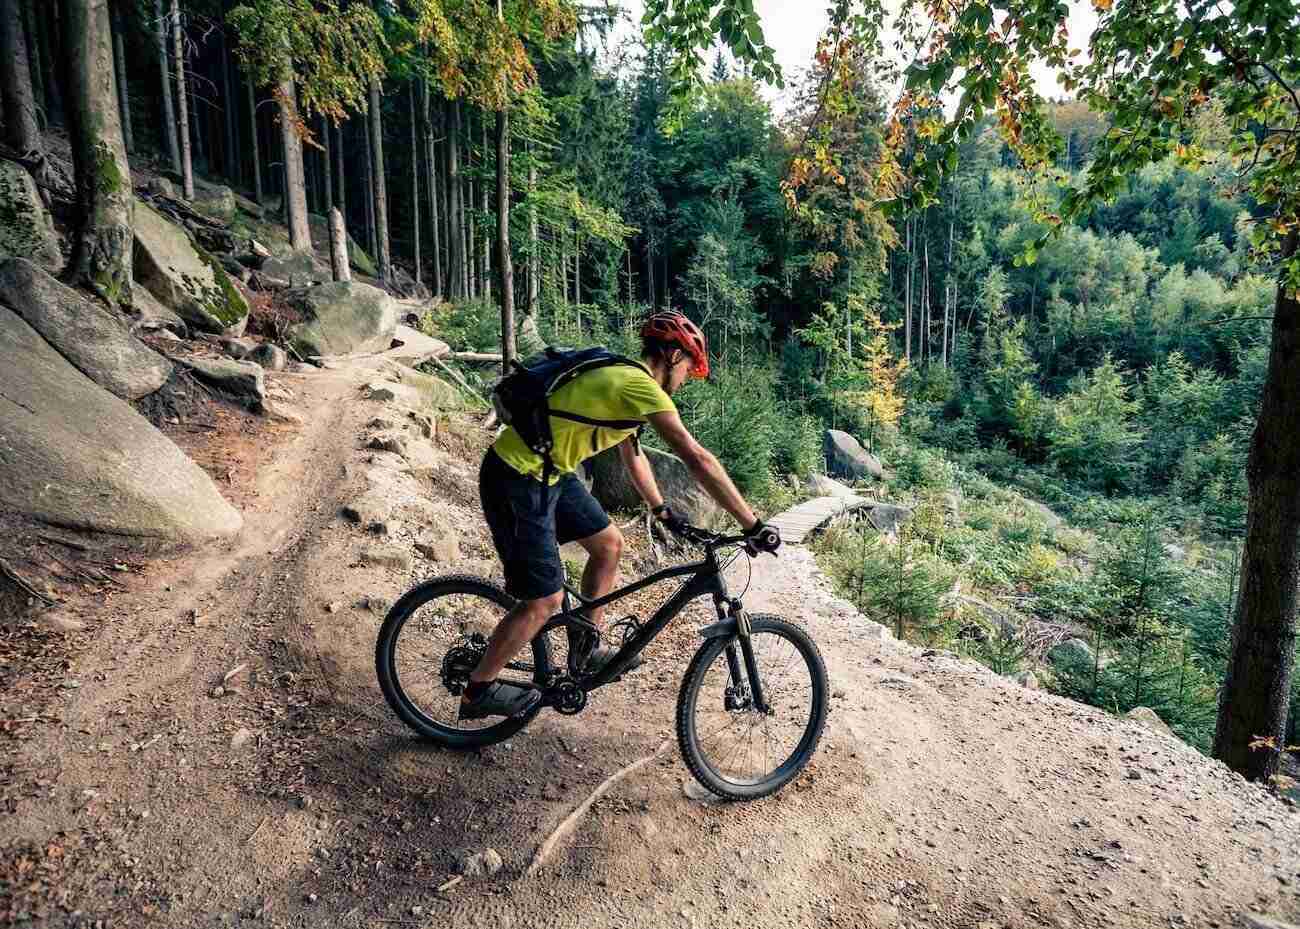 Find the best bike park near you with this complete guide to lift-served downhill mountain bike parks in the US from East coast to West coast